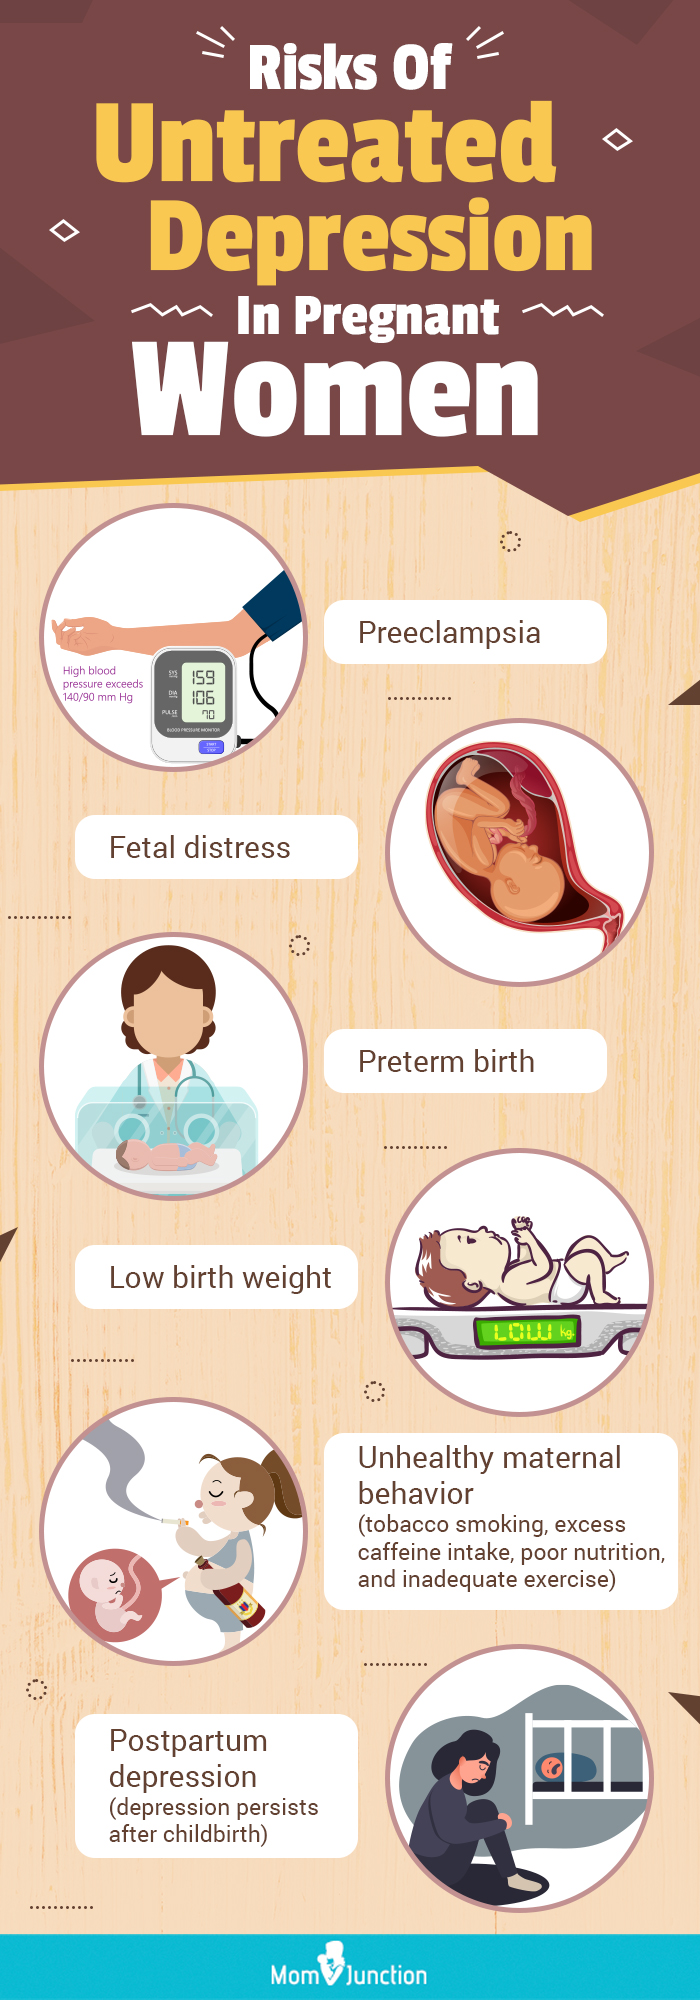 risks of untreated depression in pregnant women (infographic)